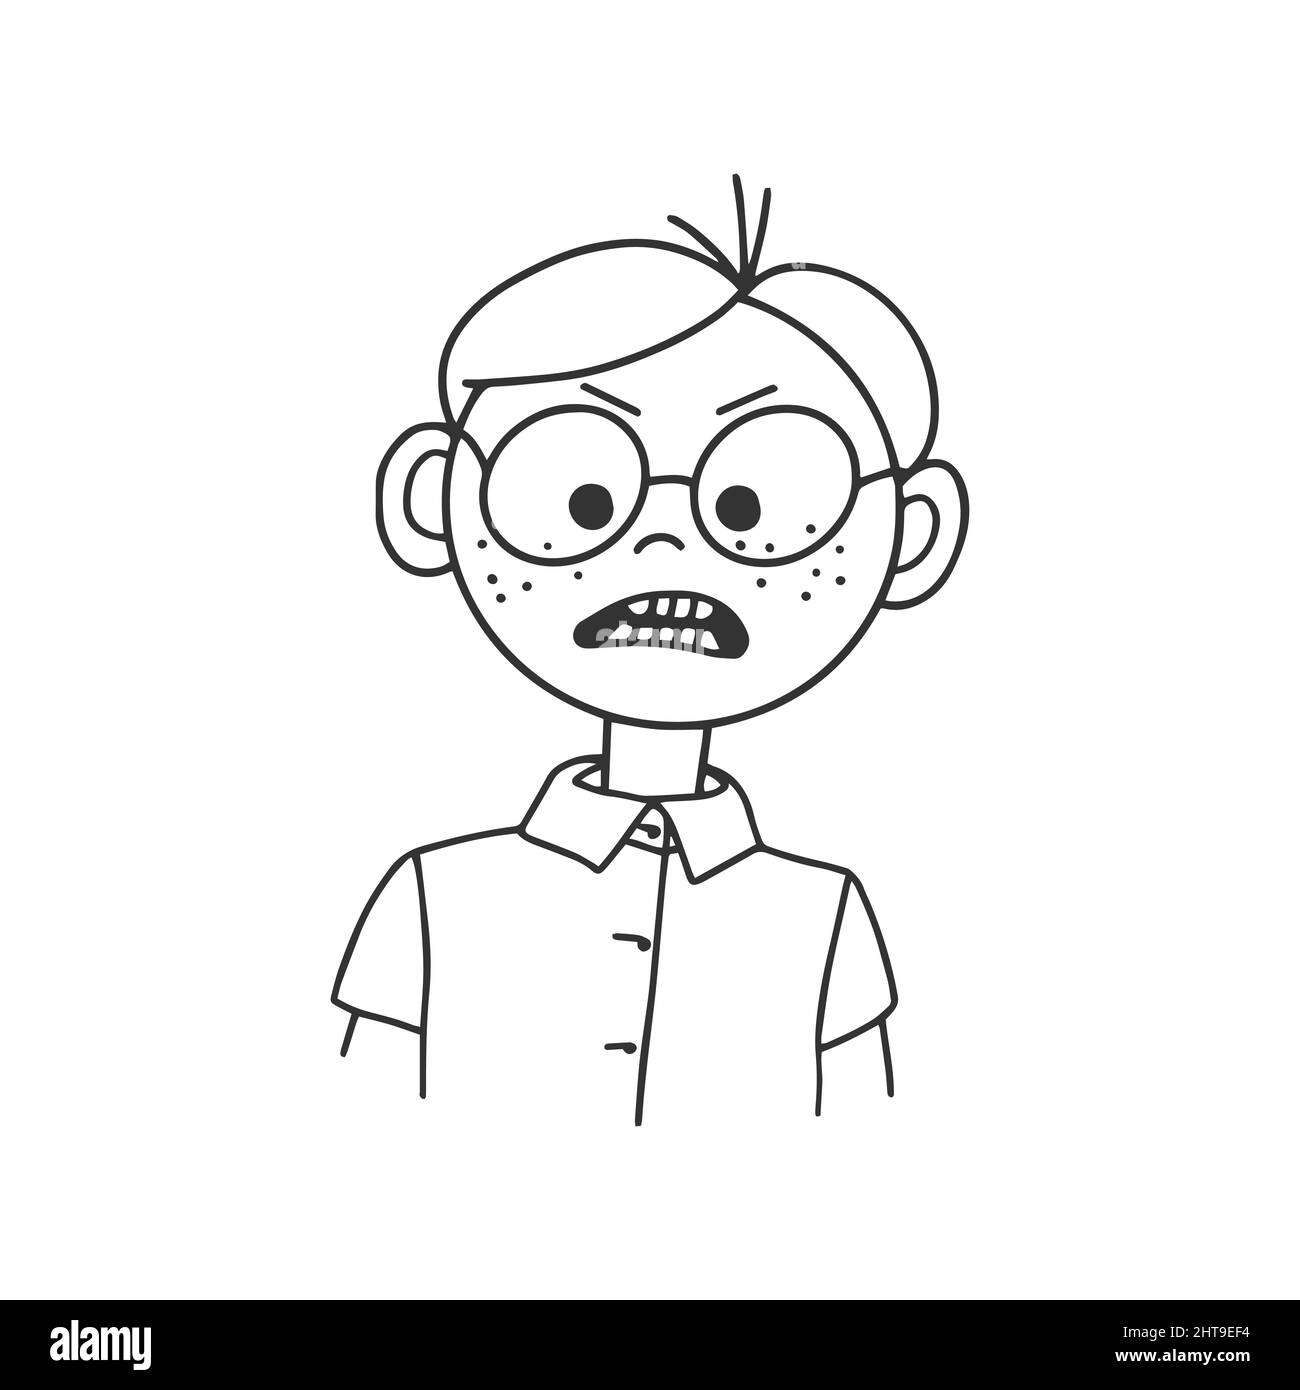 Contour drawing of a cartoon man with glasses. Doodle styleContour drawing of a cartoon man in glasses with emotions on his face. Doodle style Stock Vector